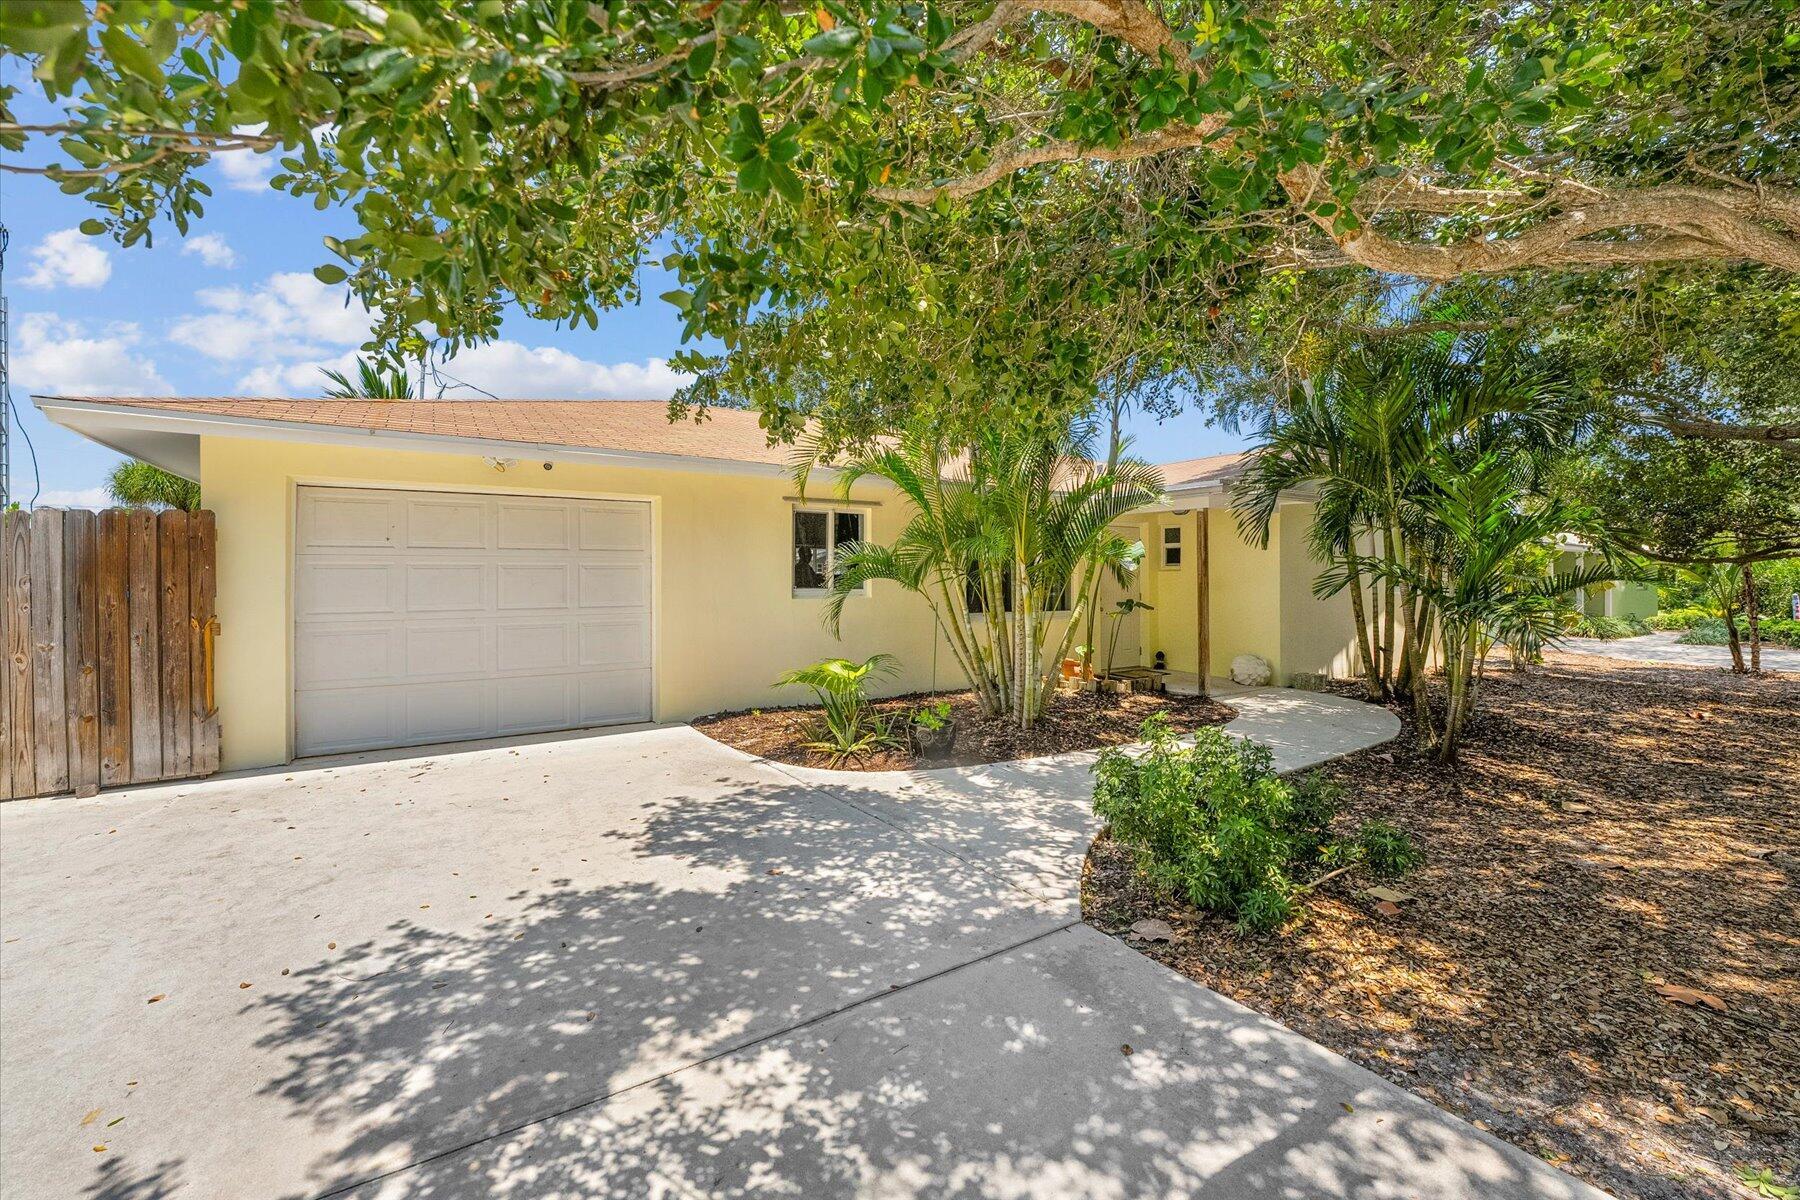 Capture the coastal Florida lifestyle with all the marine amenities available nearby in this quaint 2/2 garden home with pool and no HOA nestled in the Riverside Drive neighborhood of Jupiter. In the vicinity you will find the Jupiter Inlet Lighthouse & Museum, Jupiter Beach Park, Dubois Park, Sawfish Bay Park, Burt Reynolds Park which offers public boat ramps to the Loxahatchee River, and more! Pristine beaches, fishing, boating, canoeing, paddle boarding, and numerous live local entertainment hotspots & waterfront restaurants are just a few of the highlights this popular coastal community has to offer. Along Riverside Drive there are several access points to the Loxahatchee River where you can enjoy paddle boarding, canoeing, sunsets, and much more! Your slice of paradise awaits!